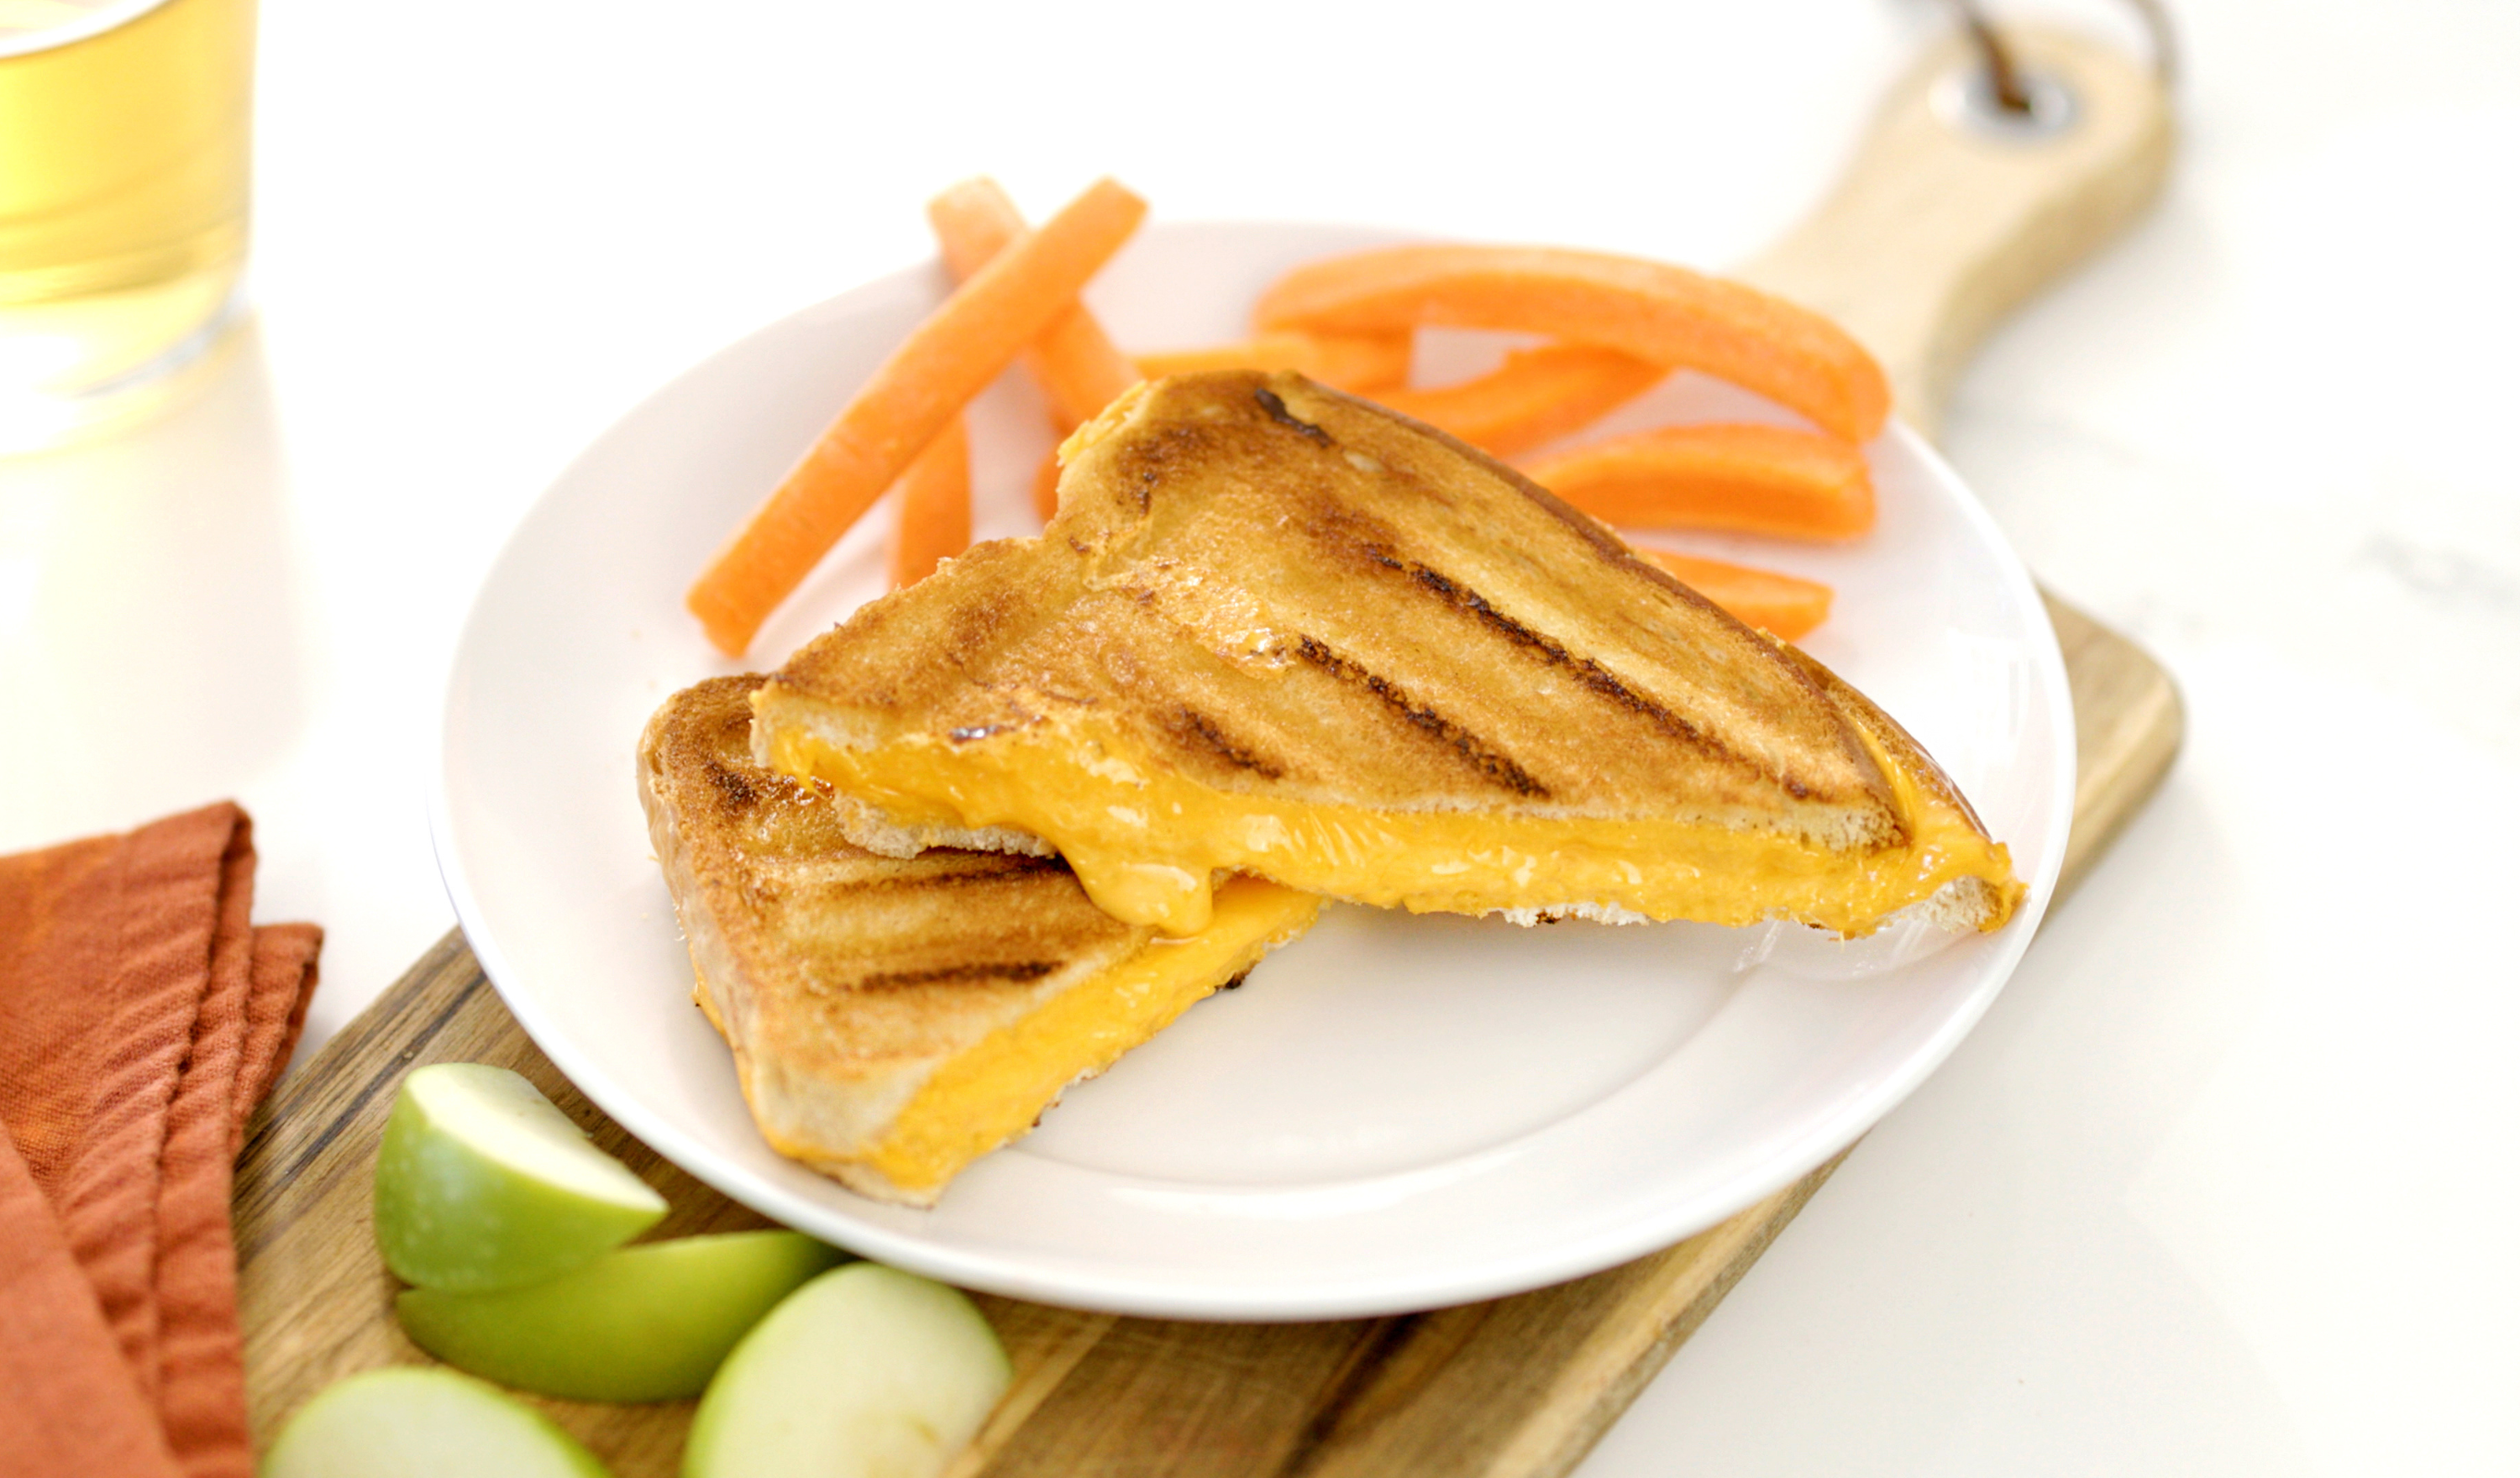 Toaster Grilled Cheese